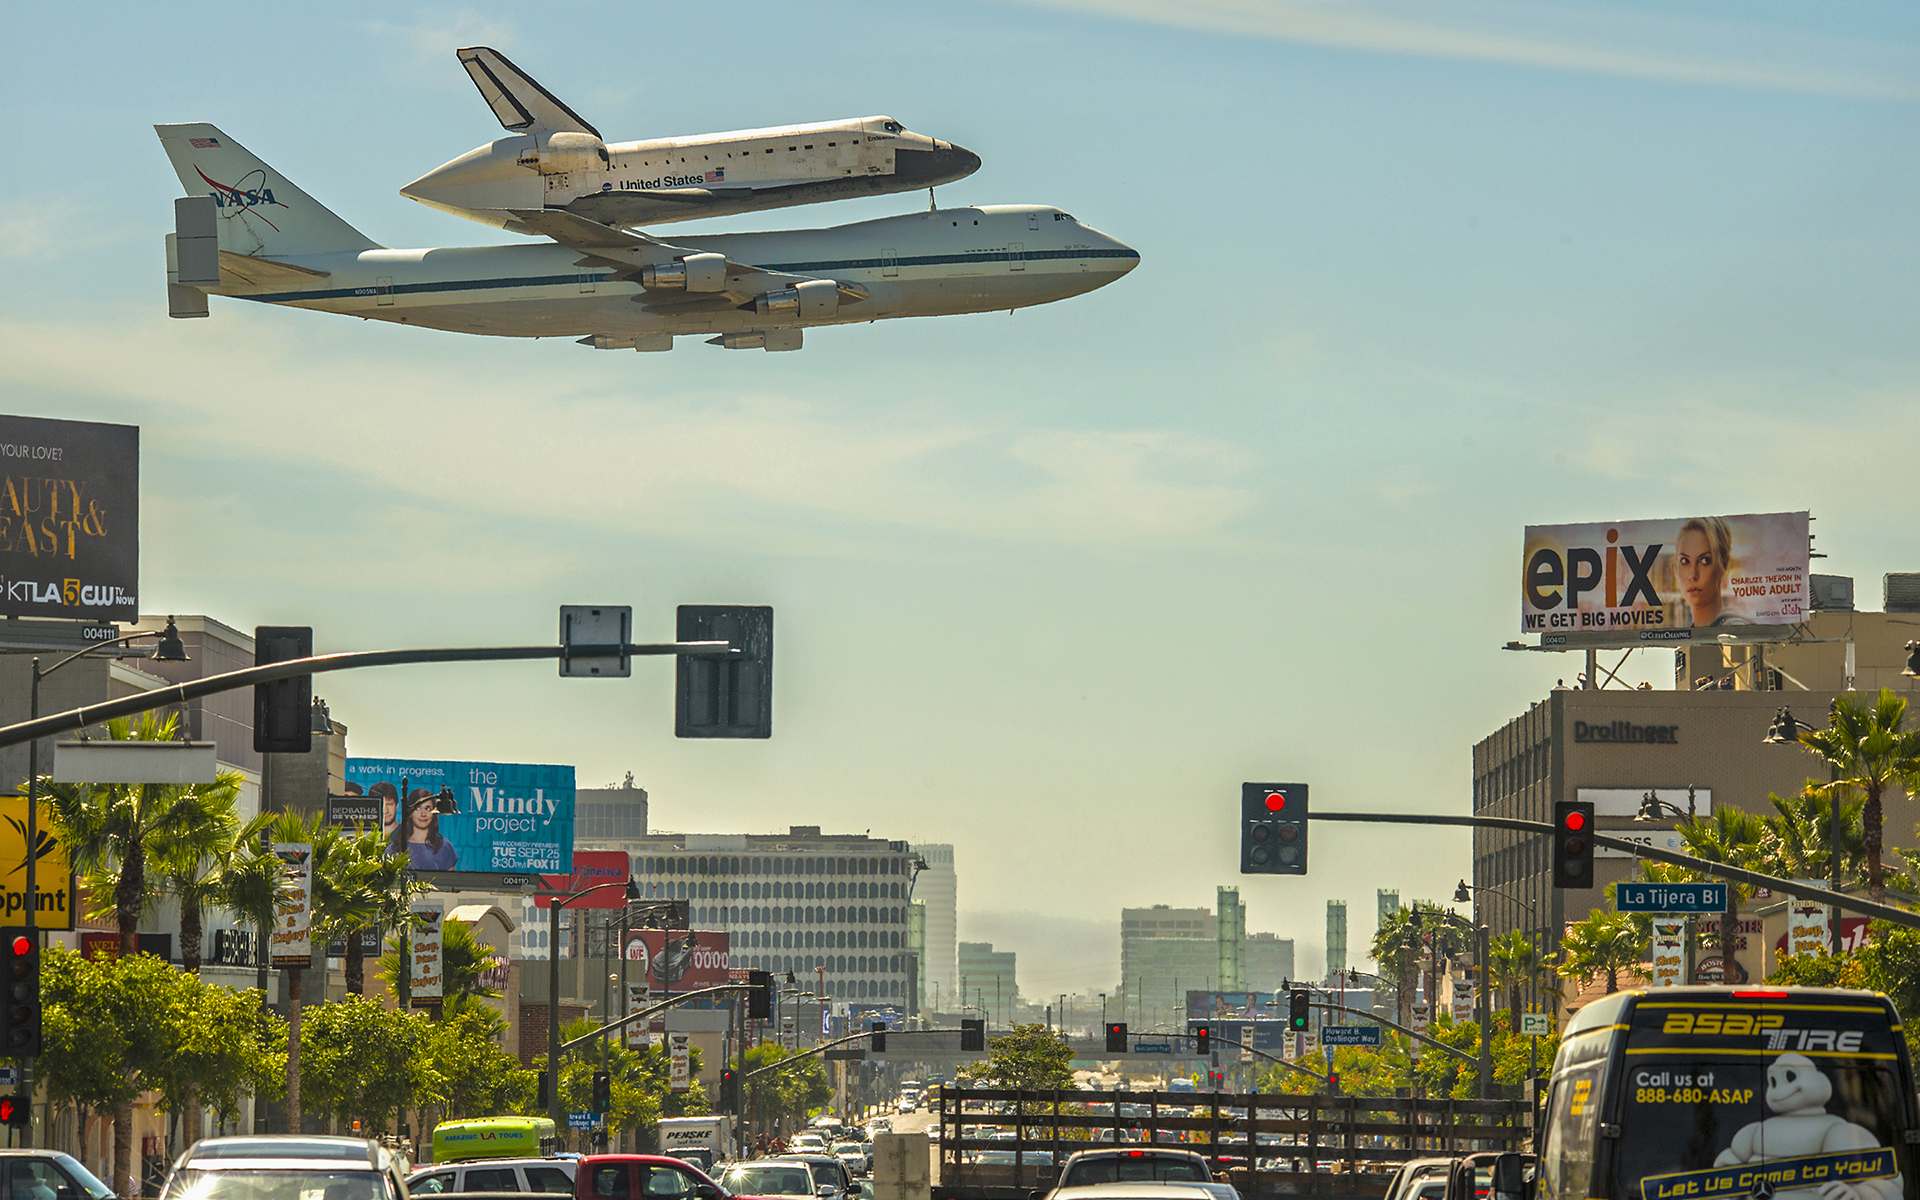 los angeles, airplane, vehicles, space shuttle endeavour, nasa, shuttle, space shuttle, street, space shuttles